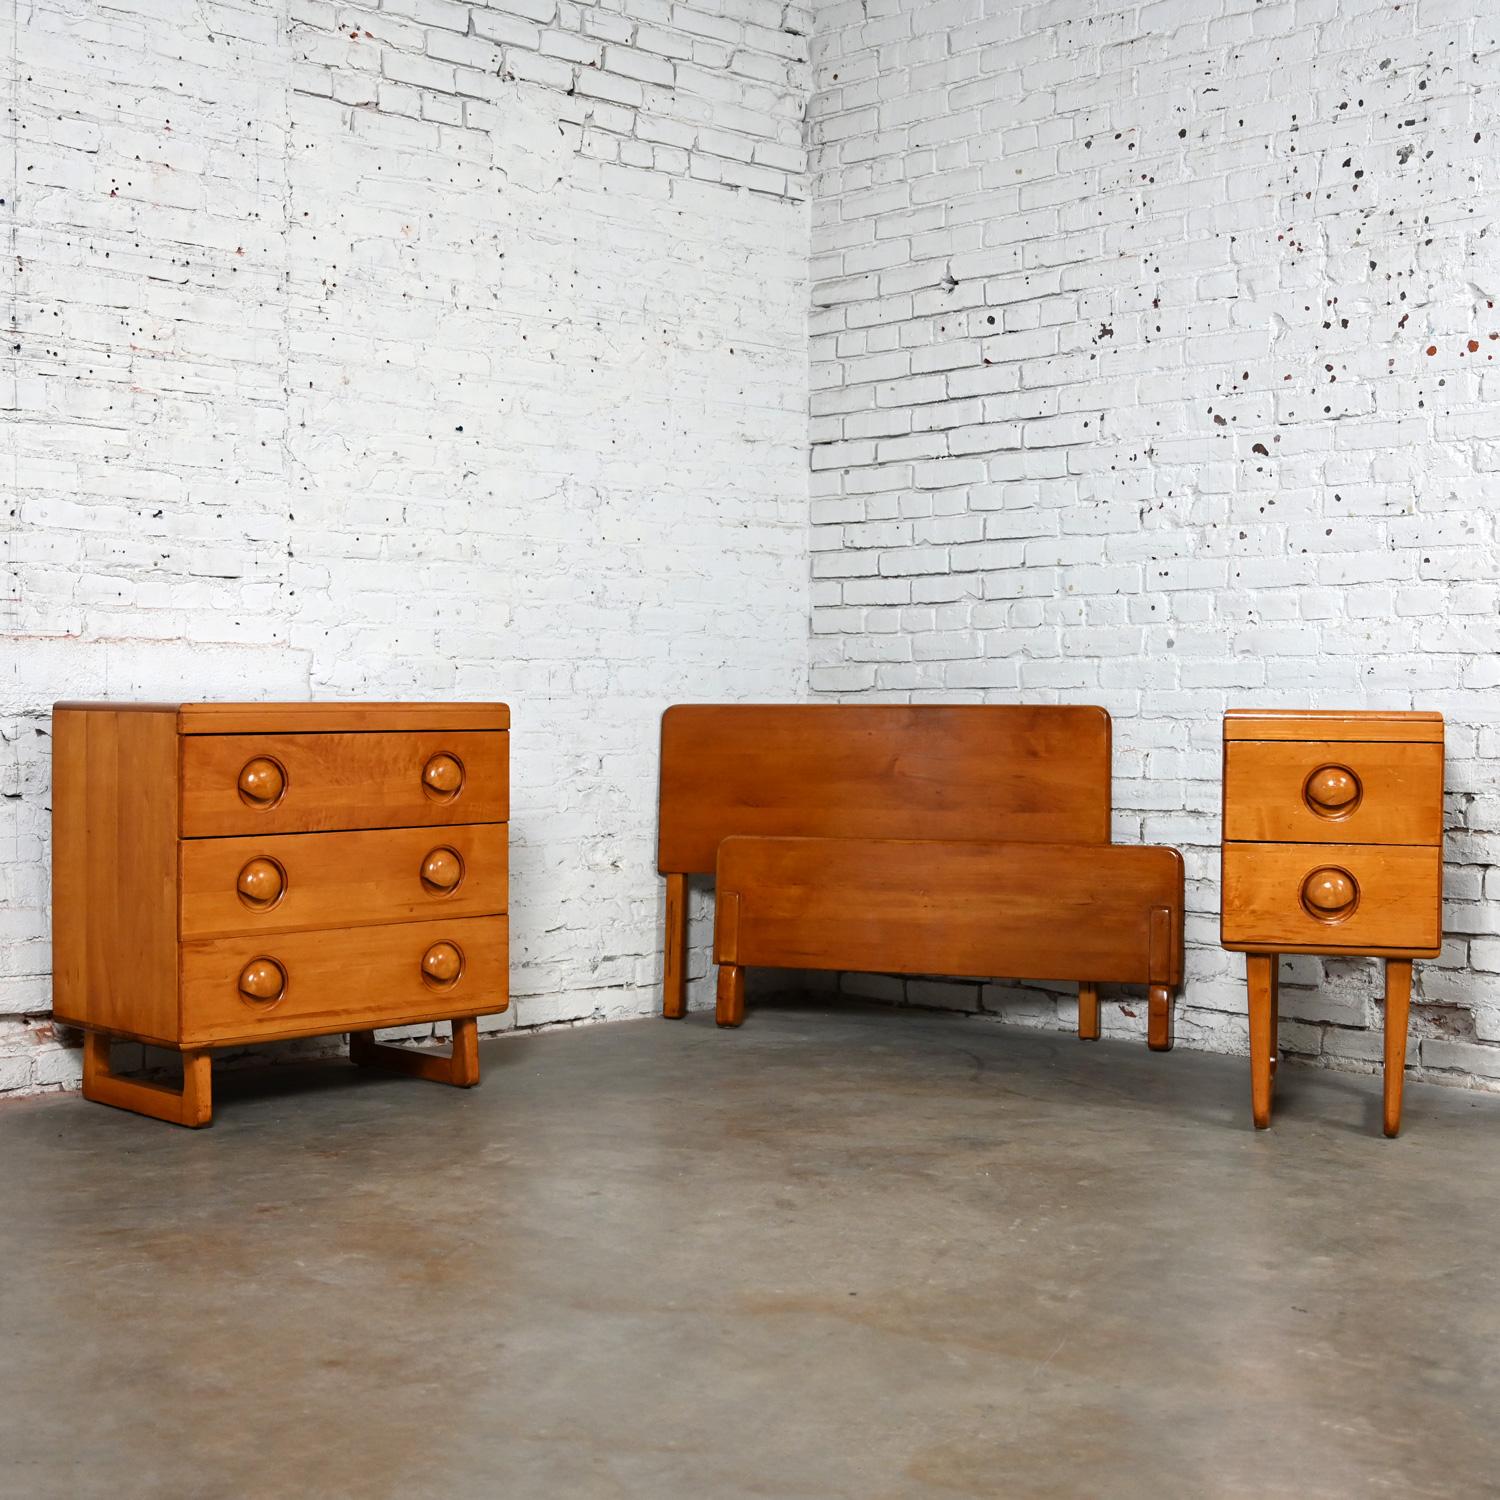 Wonderful Early to Mid-20th Century Art Moderne solid maple twin bed headboard & footboard, small 3 drawer chest or cabinet, and 2 drawer nightstand in the style of Bissman and after Russel Wright for Conant Ball. These pieces have been attributed